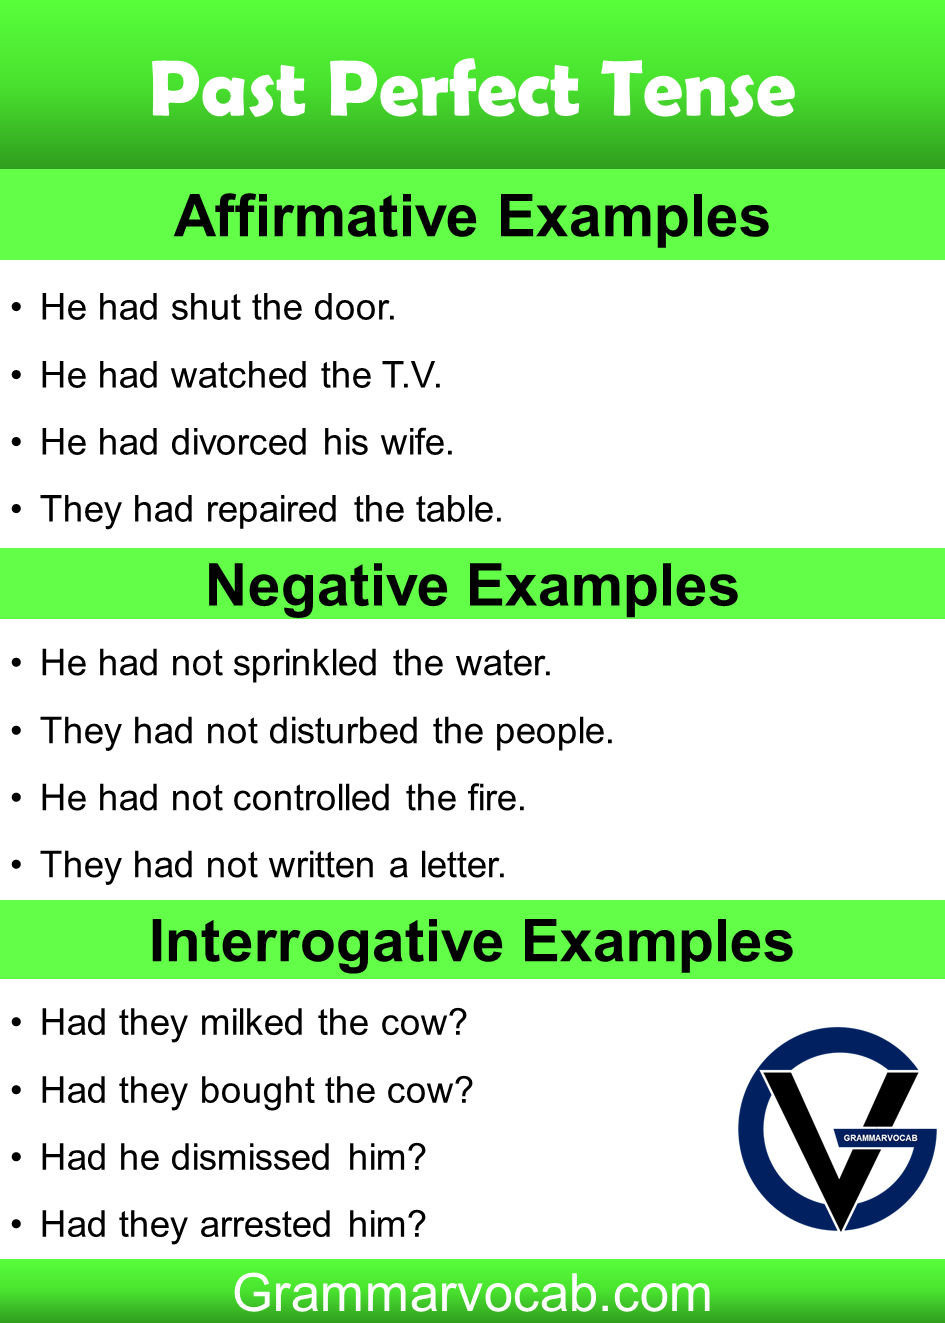 Past Perfect Tense Examples